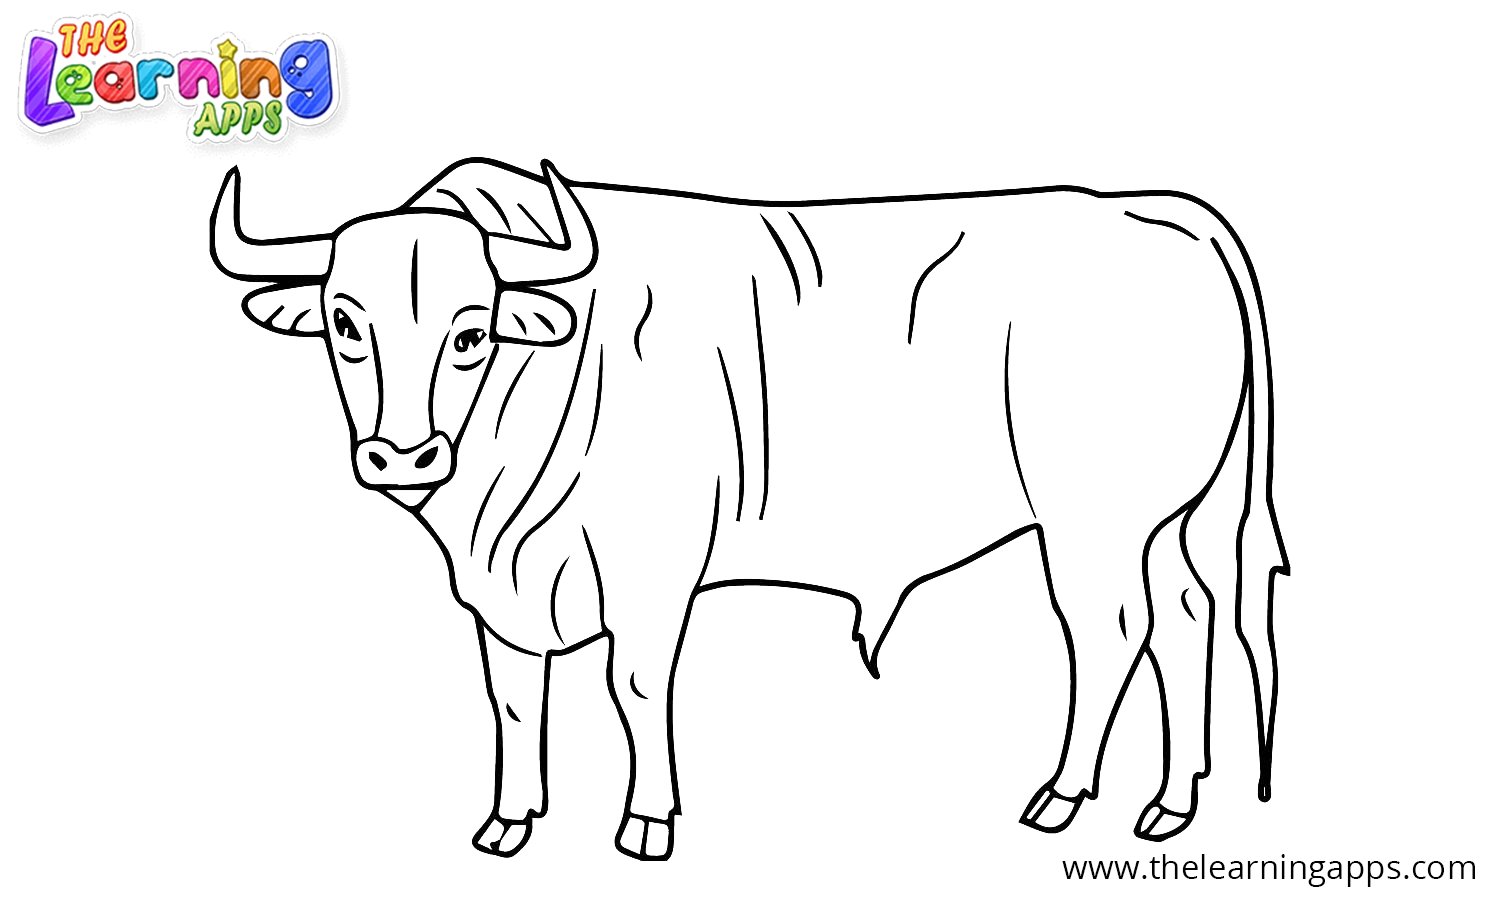 The learning apps on x this time we have farm animal coloring pages do you like coloring pictures of farm animals we know you will love our farm animals coloring pages because